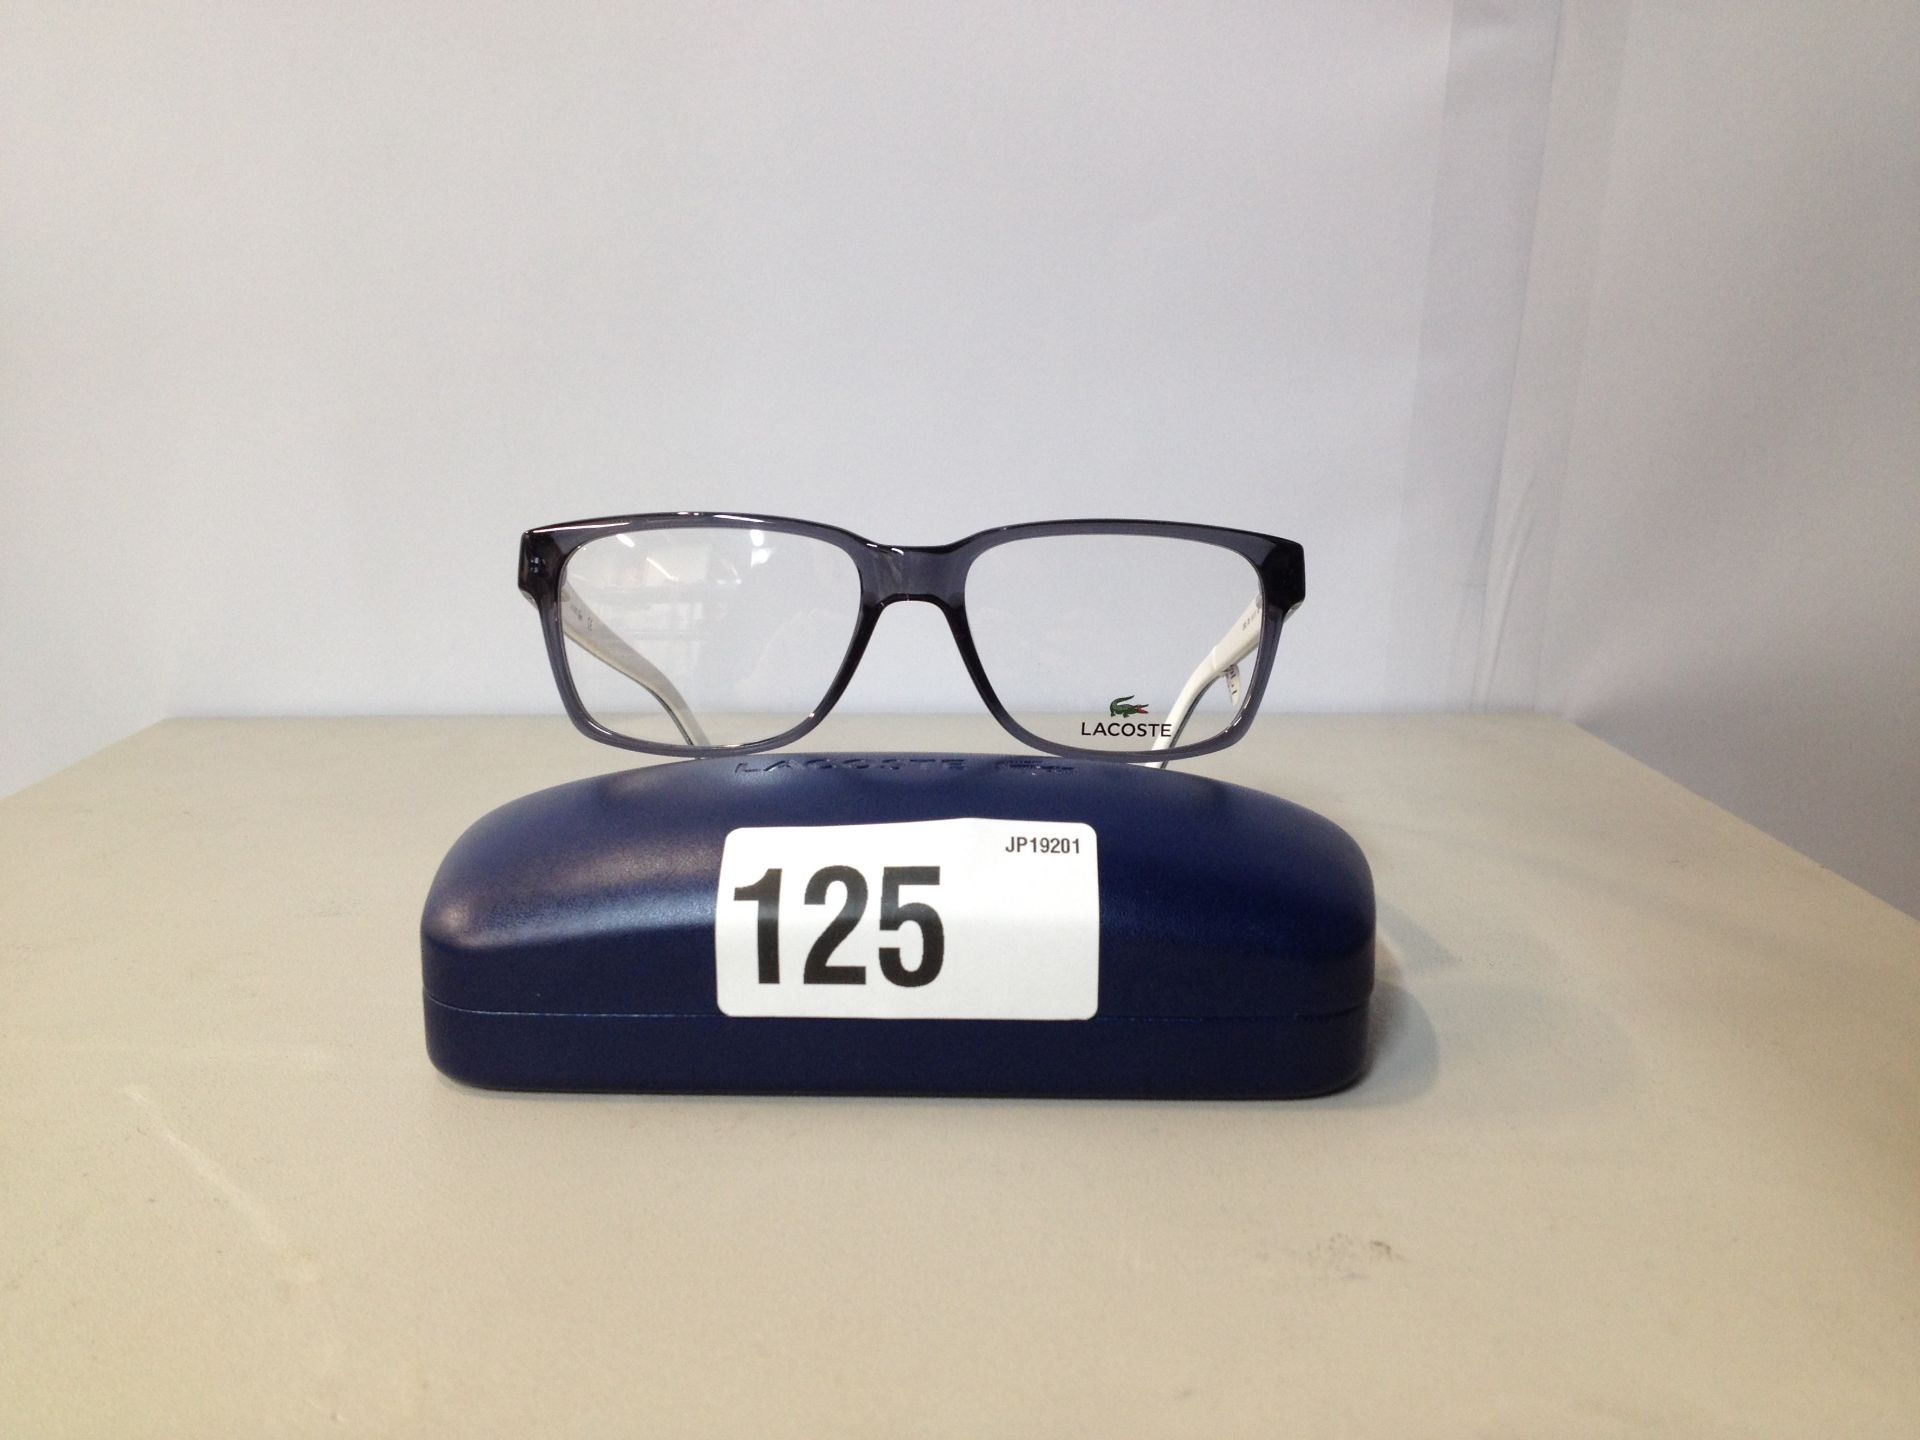 1 x Pair of Lacoste reading glasses